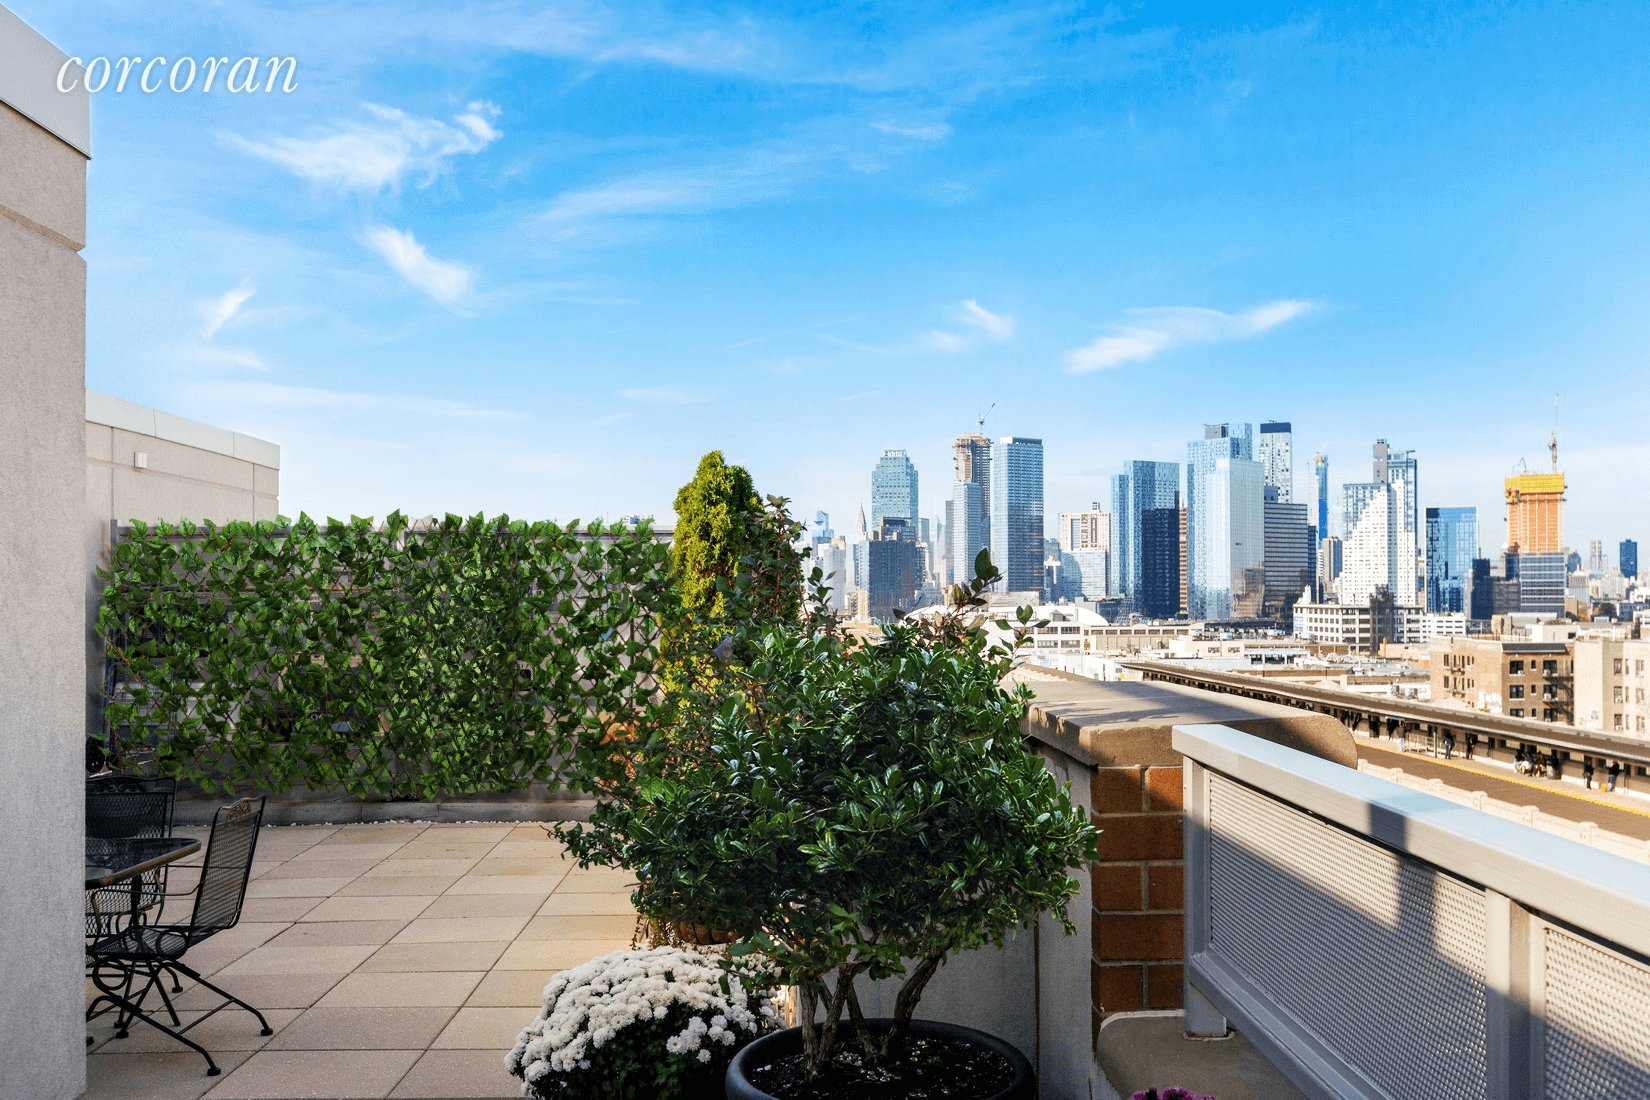 Penthouse 6B at The Phoenix Condominium features a spacious two bedroom, two bathroom layout as well as a massive private terrace with unobstructed Manhattan views.